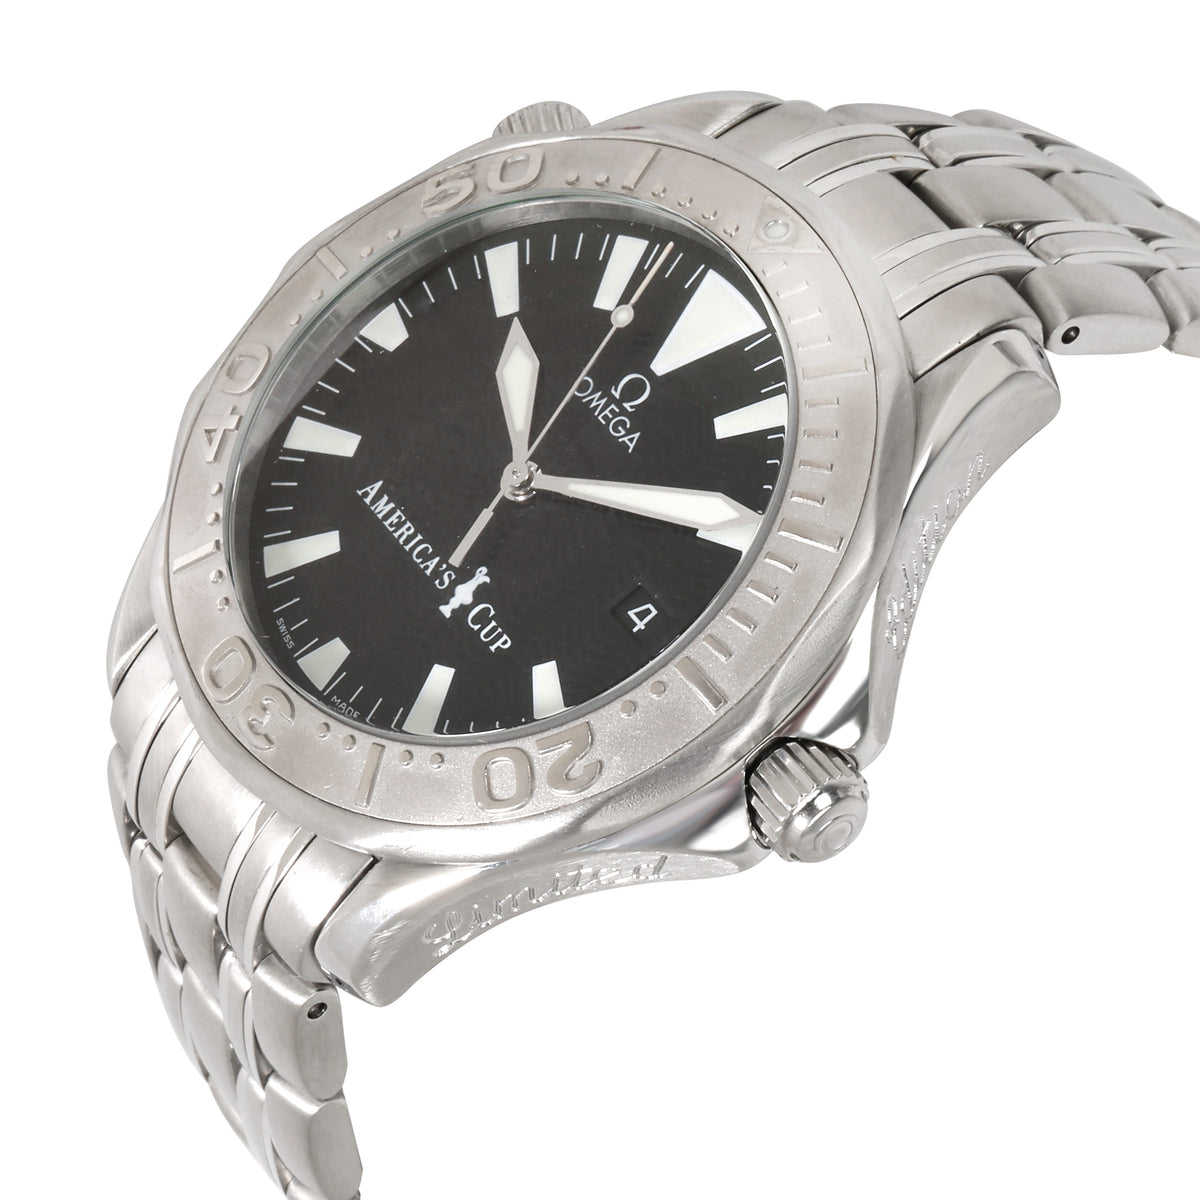 Omega Seamaster America's Cup 2533.50 Men's Watch in  Stainless Steel